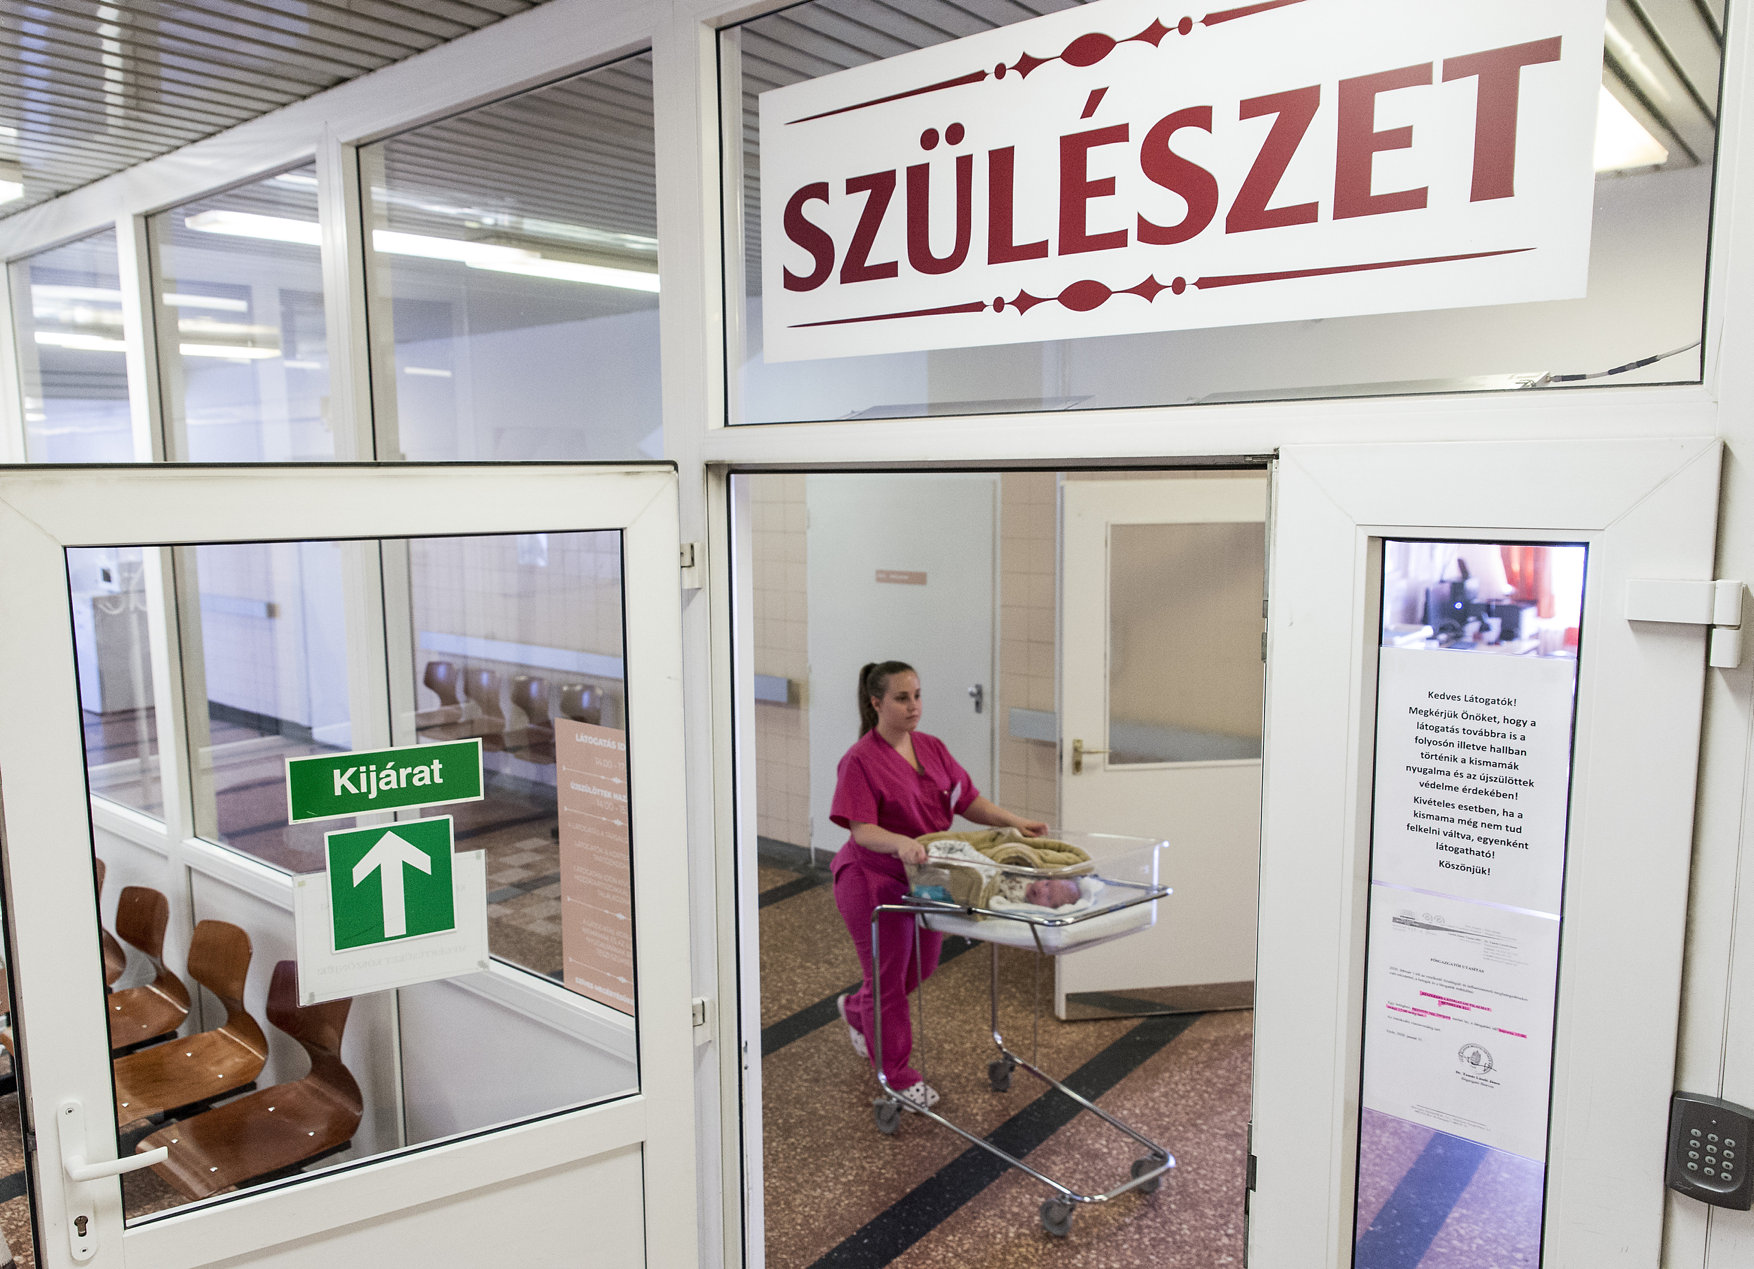 Just like the Western world, Hungary faces a shortage of nurses